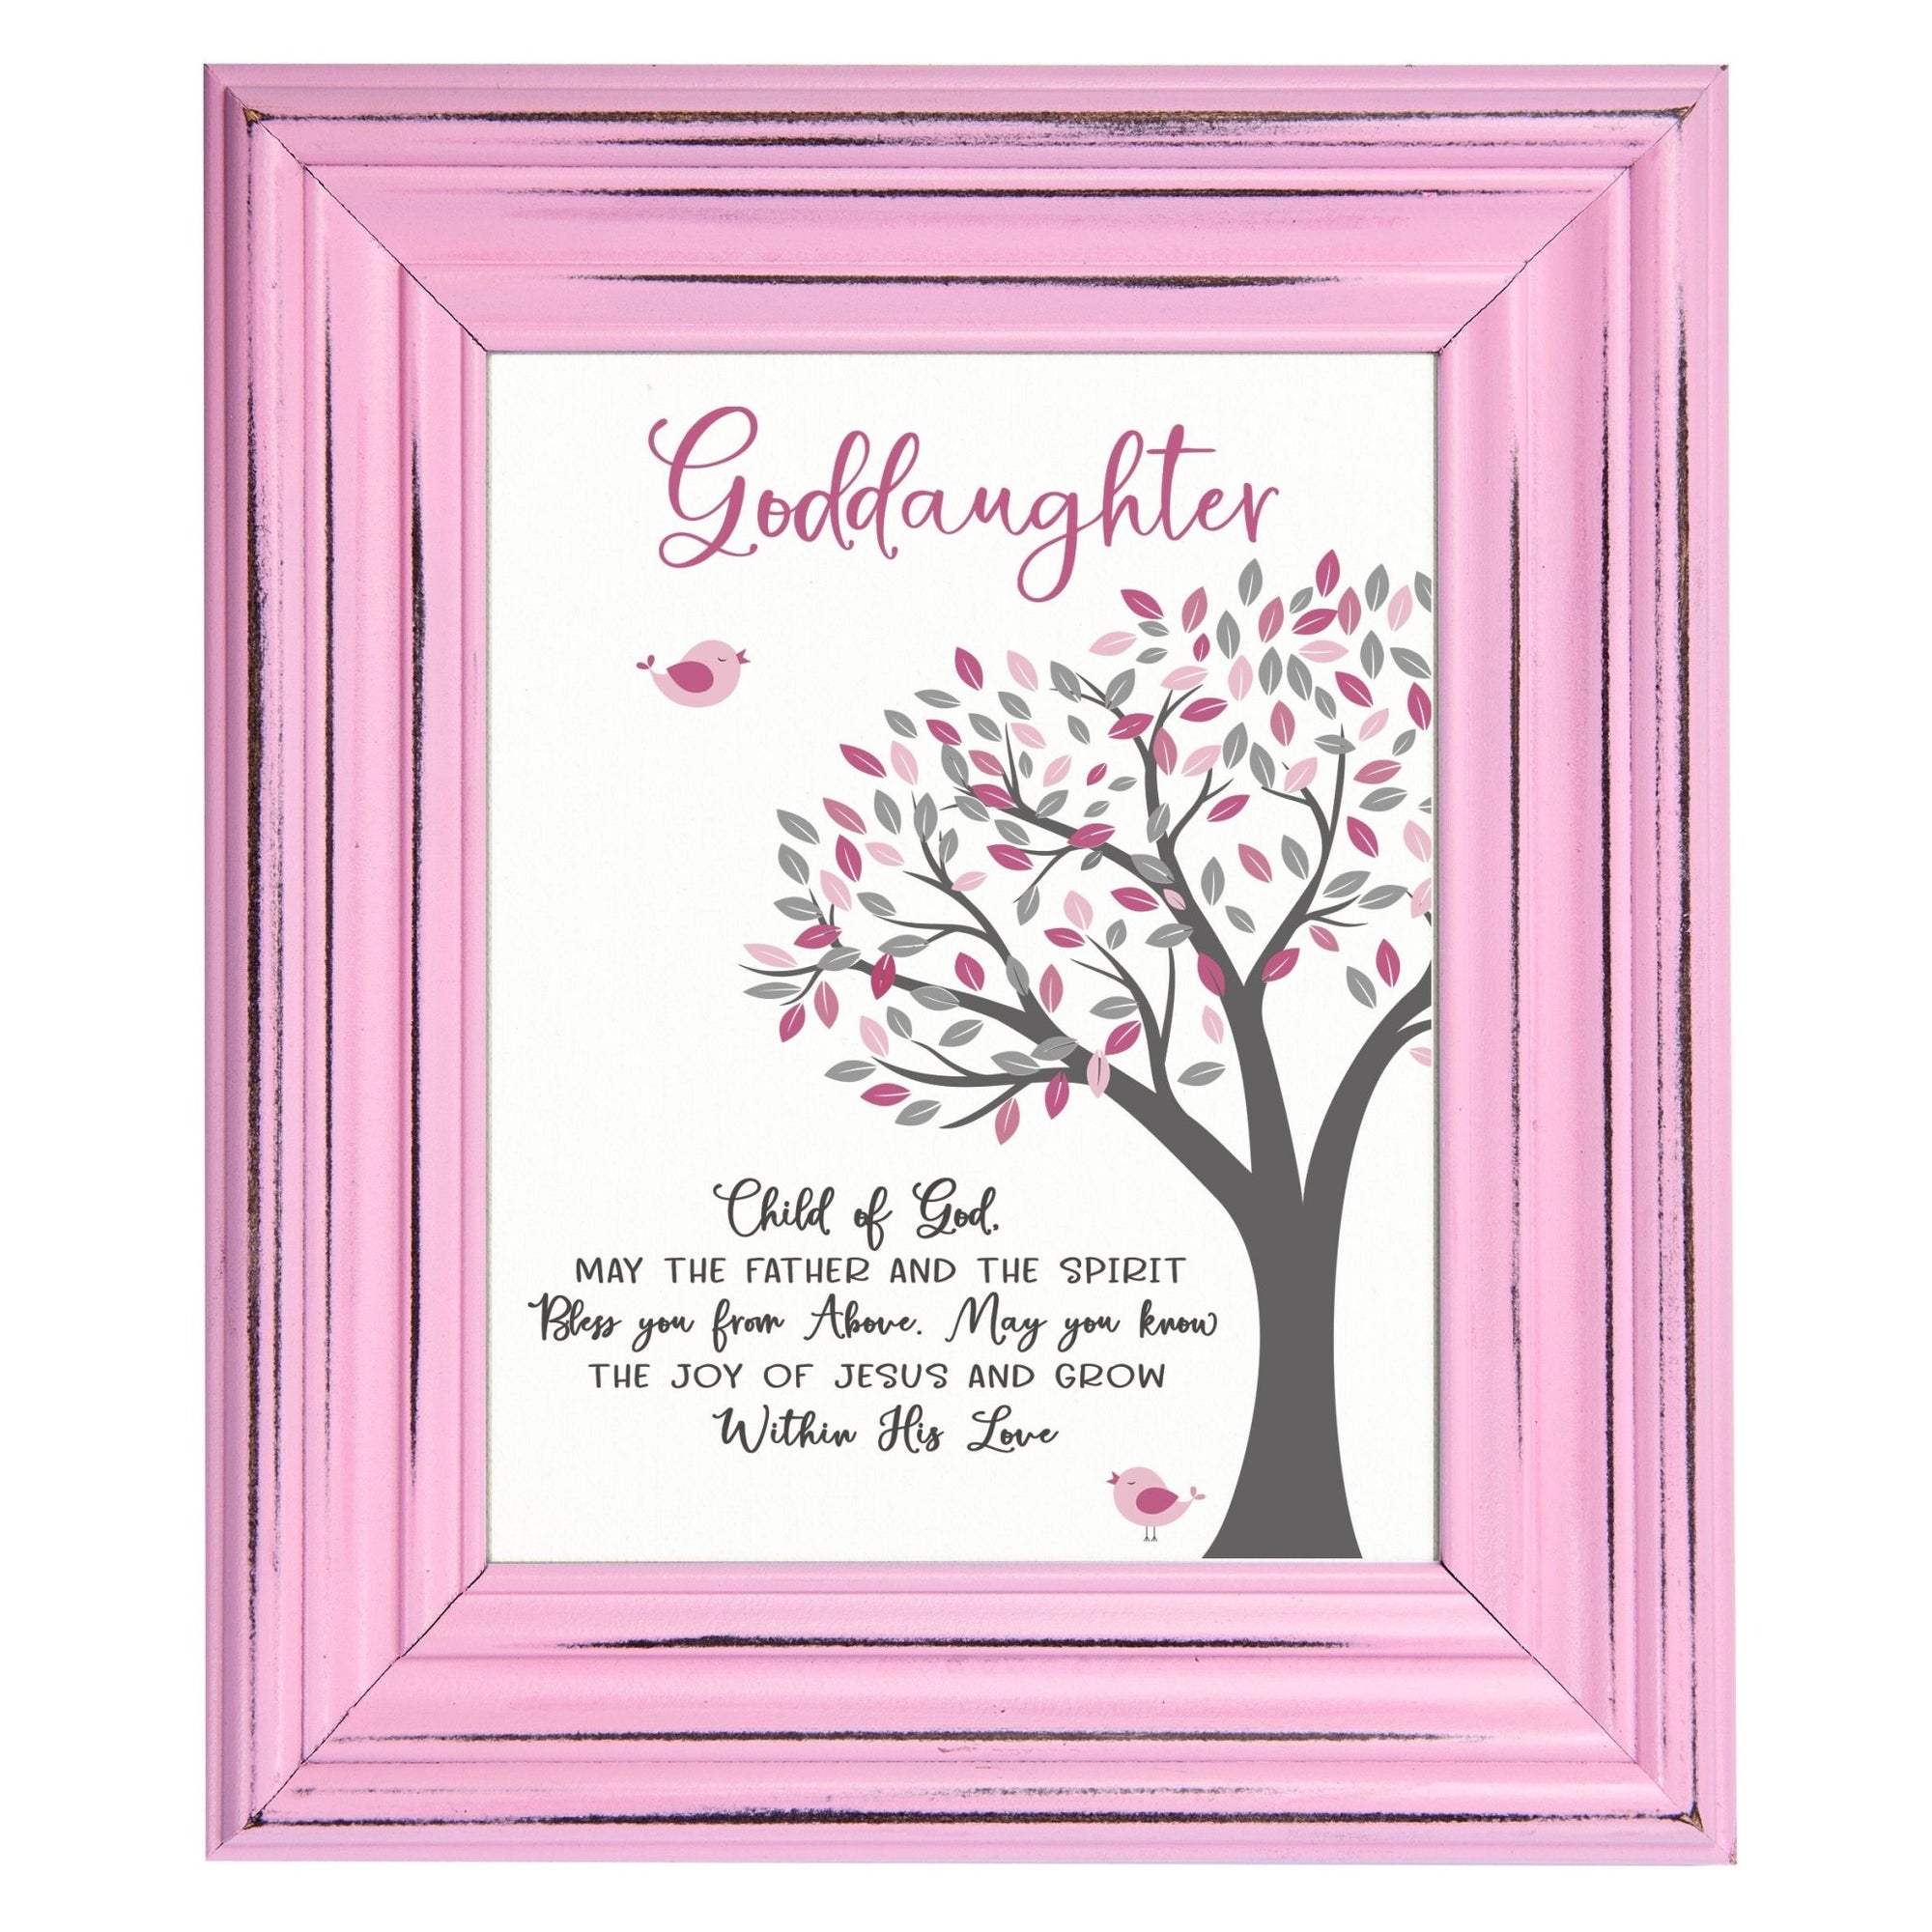 Godchild Framed Wall Signs - May The Father - LifeSong Milestones